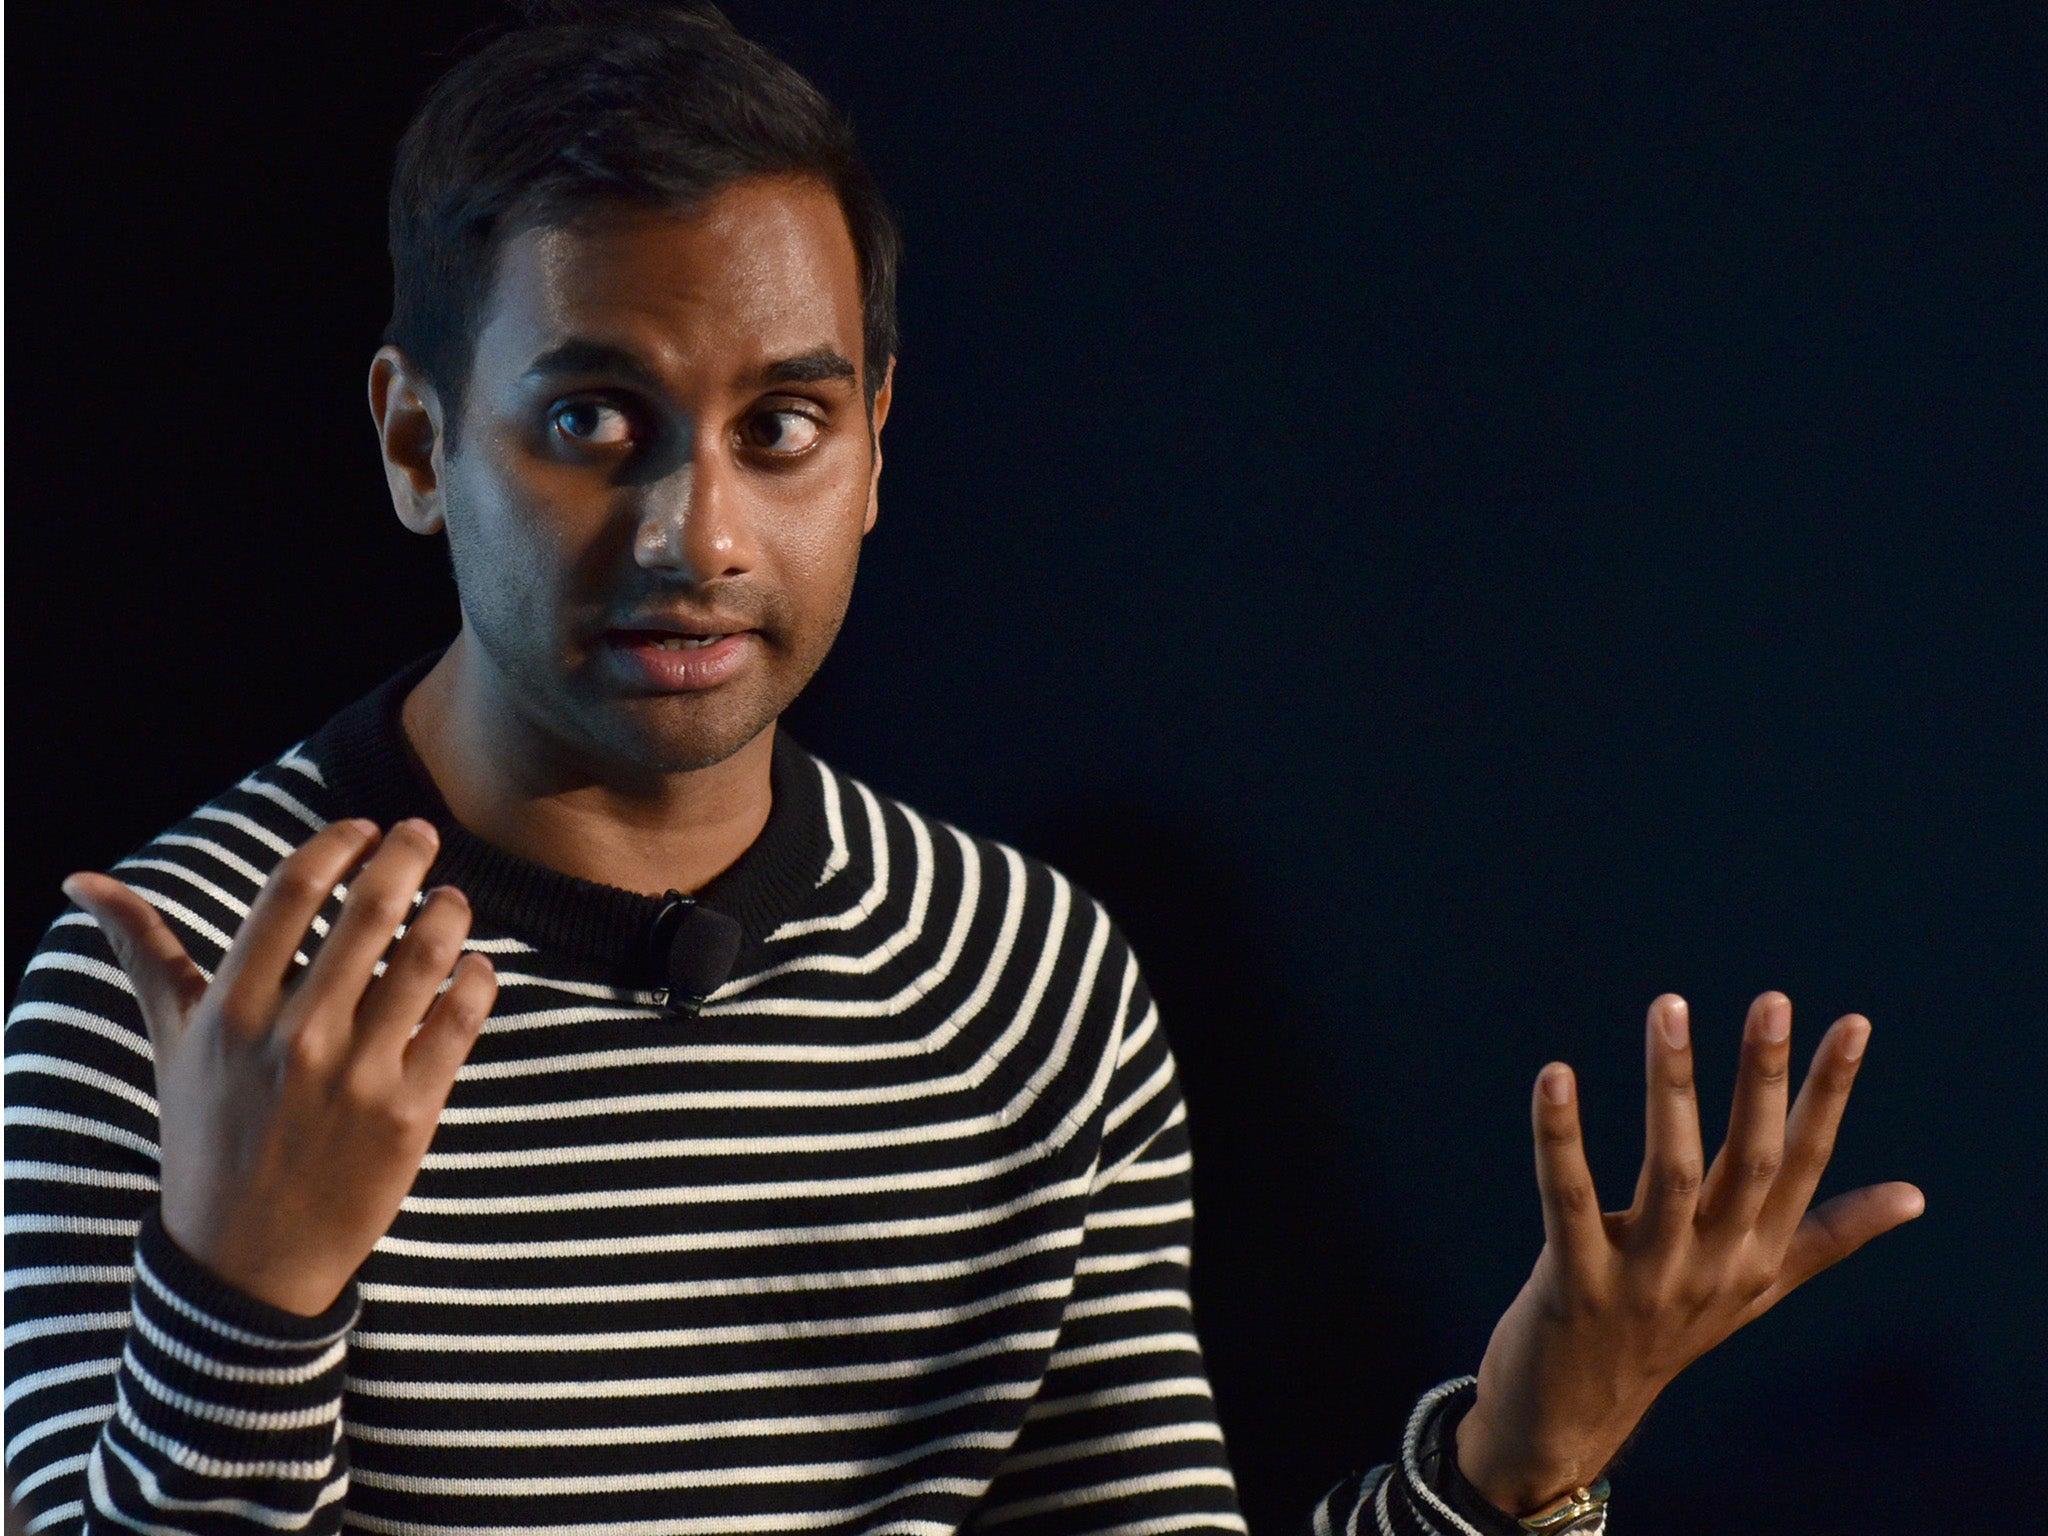 Aziz Ansari, the writer and star of the Netflix series 'Master of None', is currently trying to figure his own life out